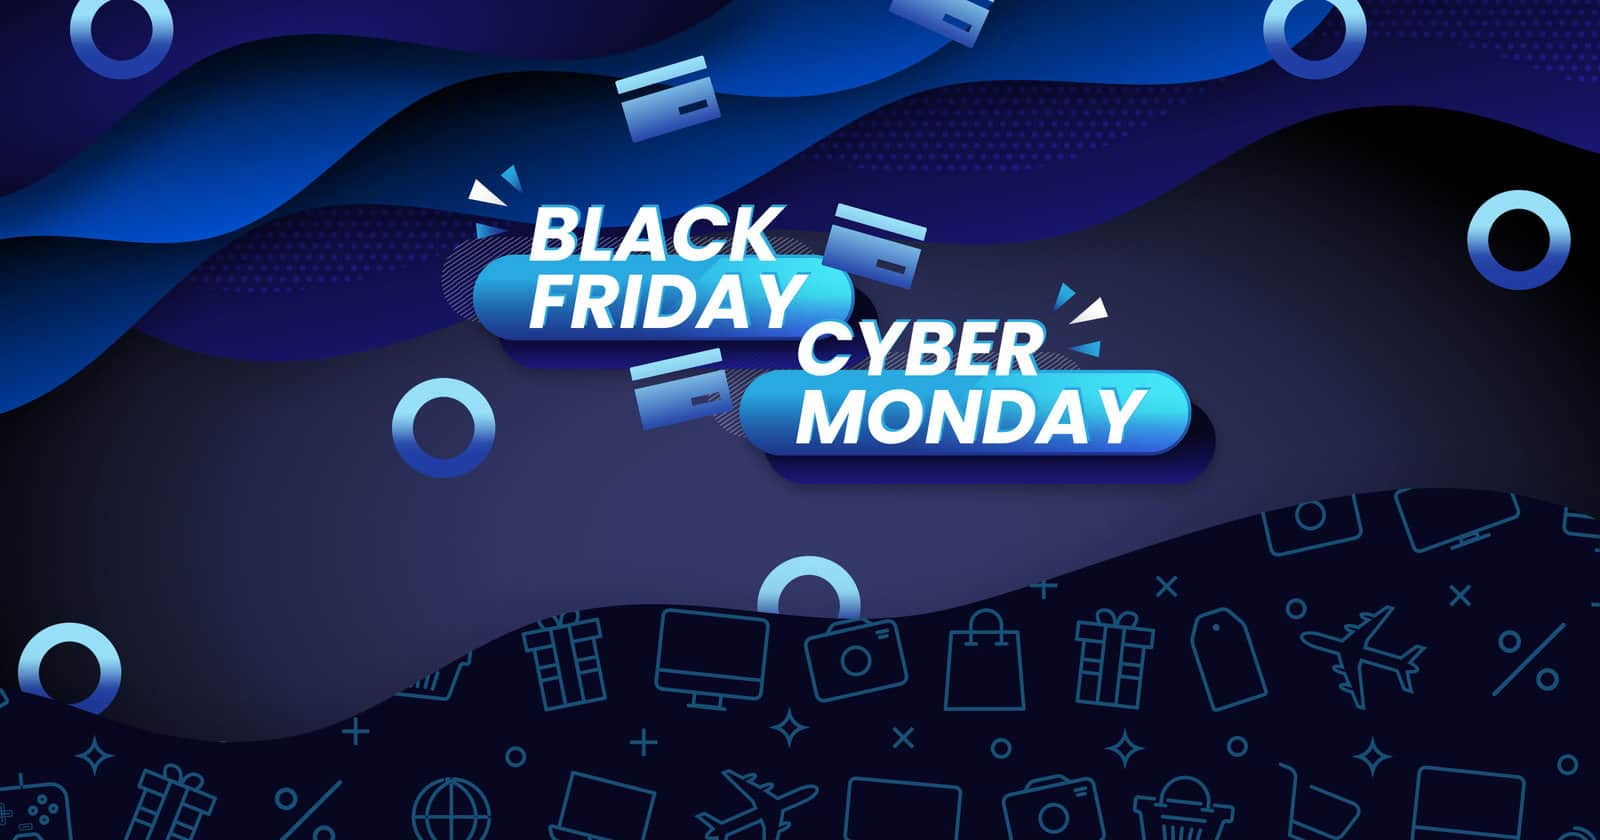 Apple Gift Card Black Friday Deal: Get 15% Credit Back • iPhone in Canada  Blog